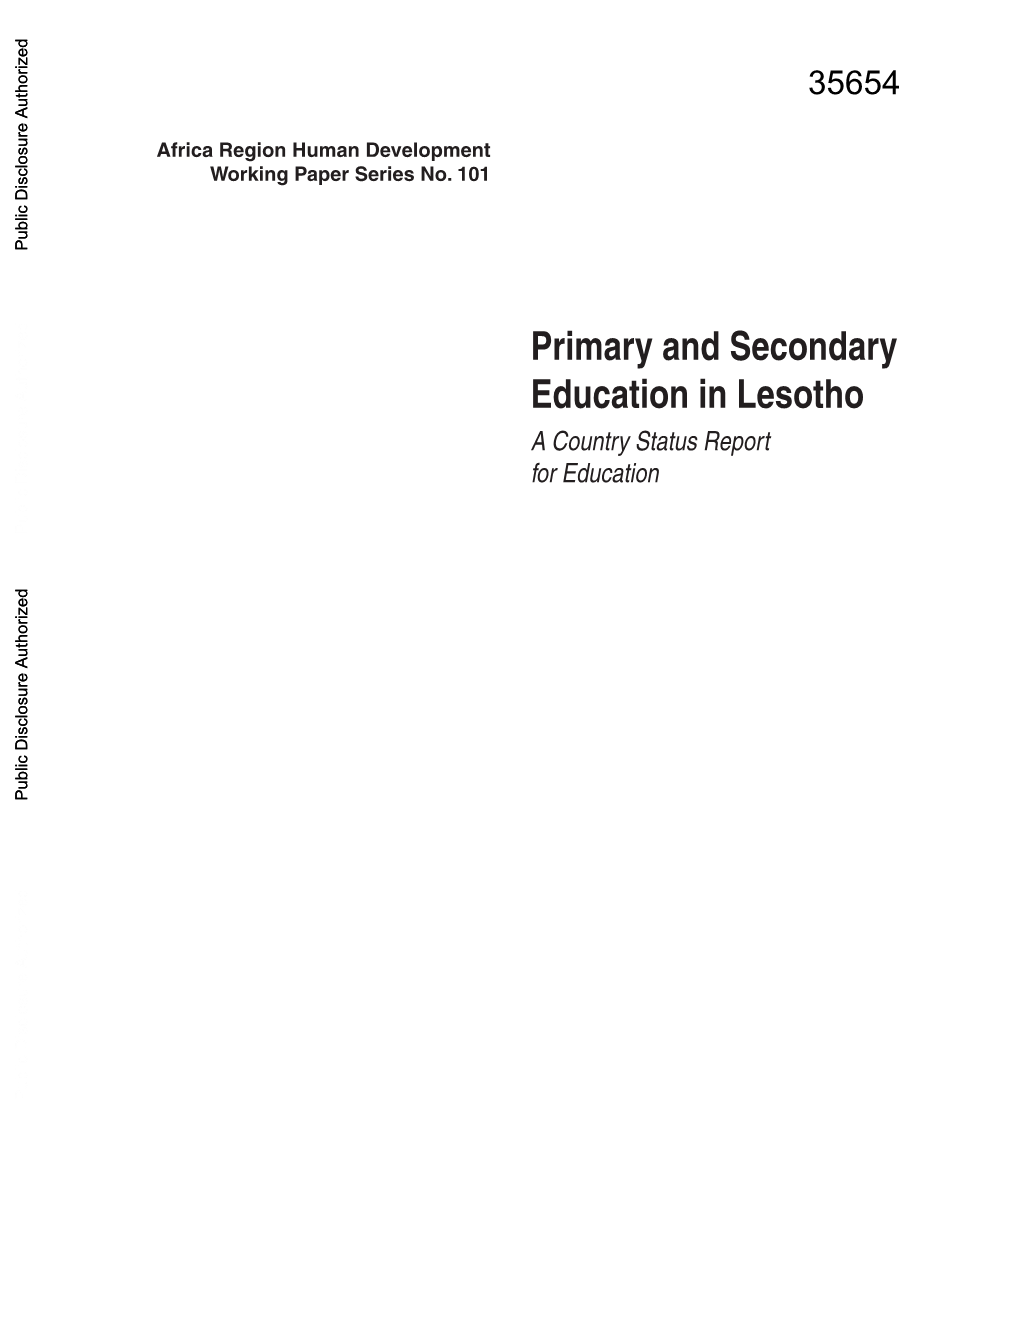 Primary and Secondary Education in Lesotho